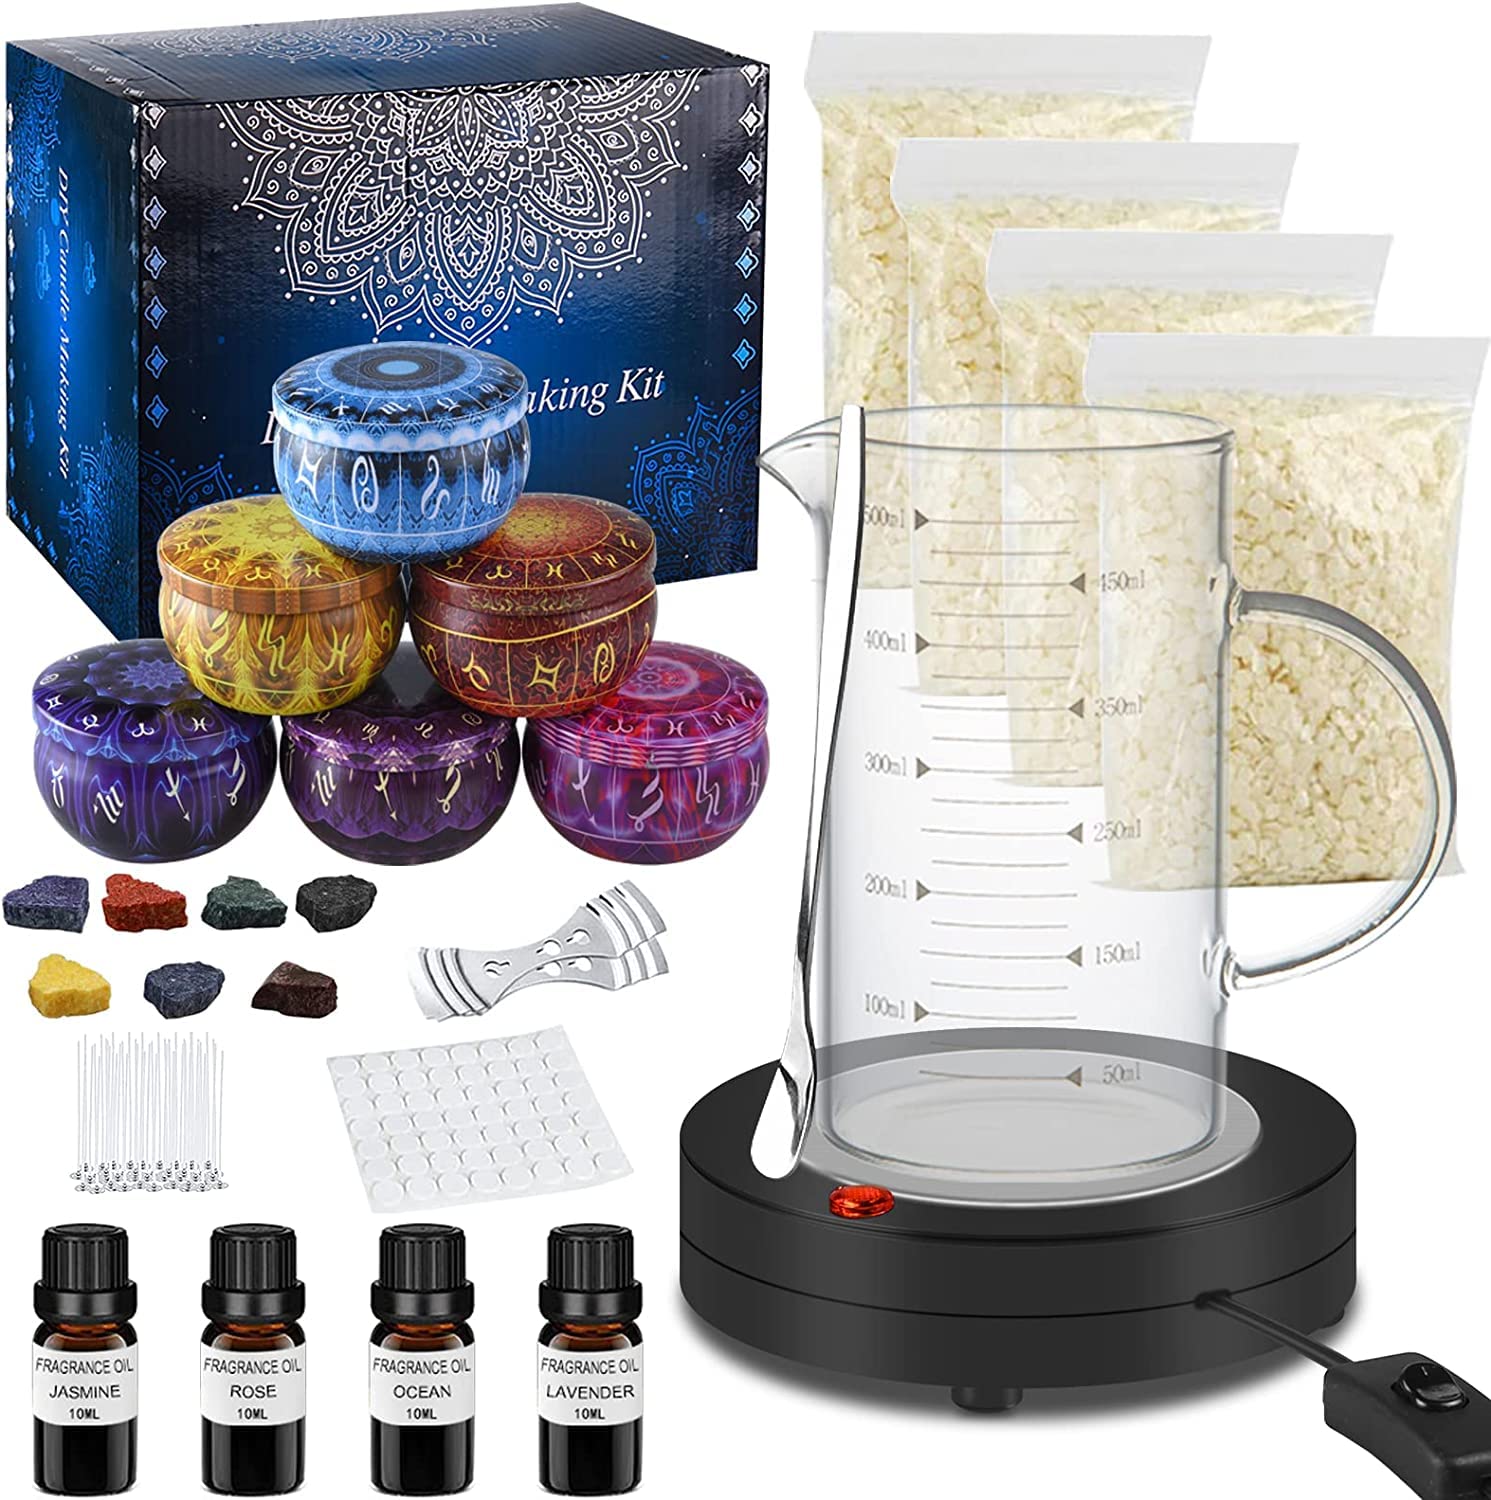 Candle Making Kit with Hot Plate,DIY Candle Making Kit for Adults &  Beginners & Kids Including Hot Plate,Wax,Dyes,Melting Pot,Candle Tins  Perfect DIY